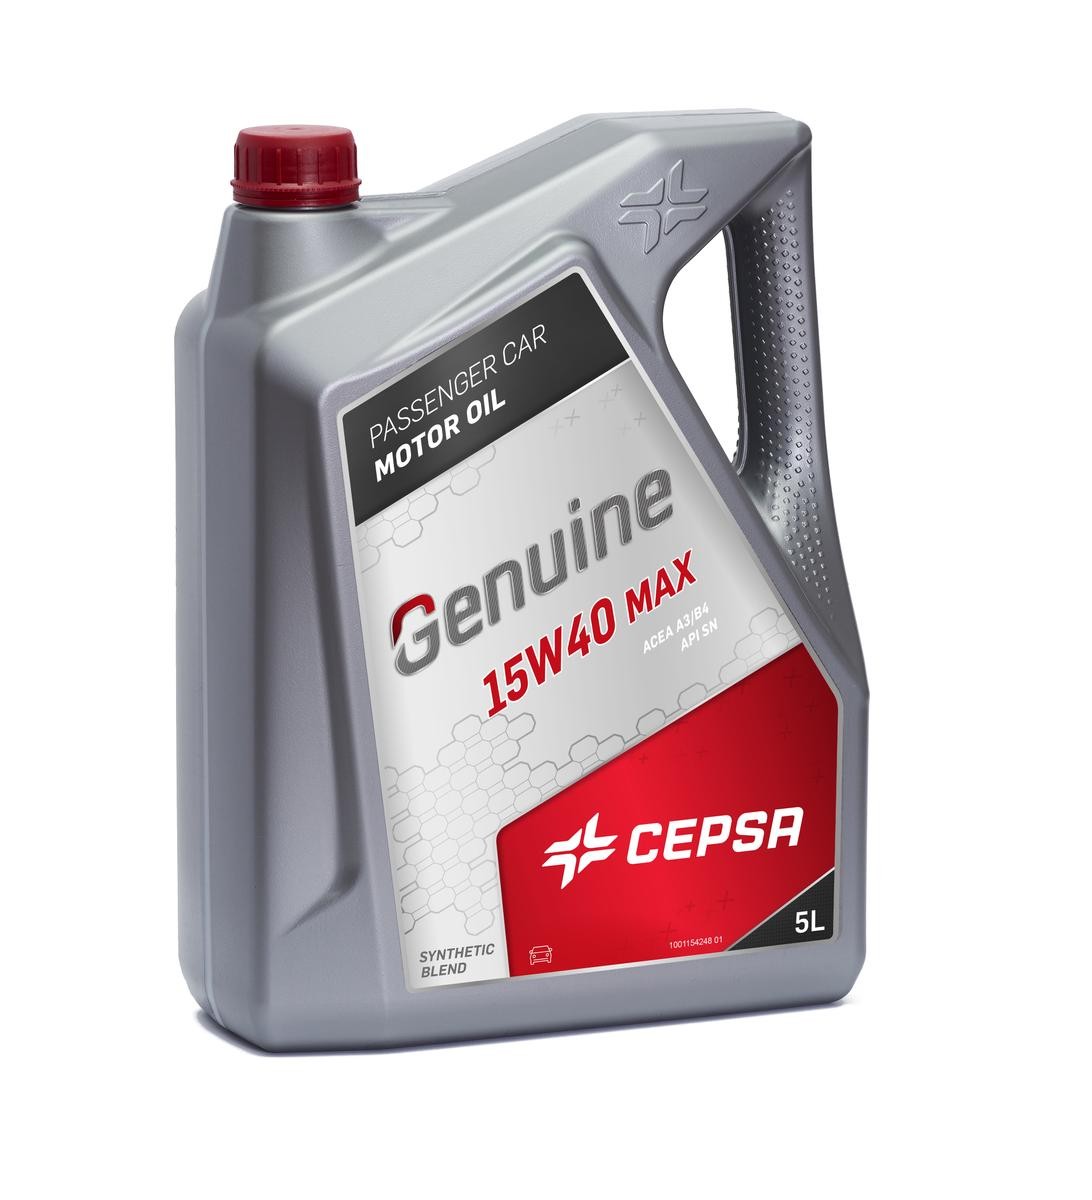 Engine oil CEPSA 15W-40, 5l, Part Synthetic Oil, Part Synthetic Oil longlife 513723090